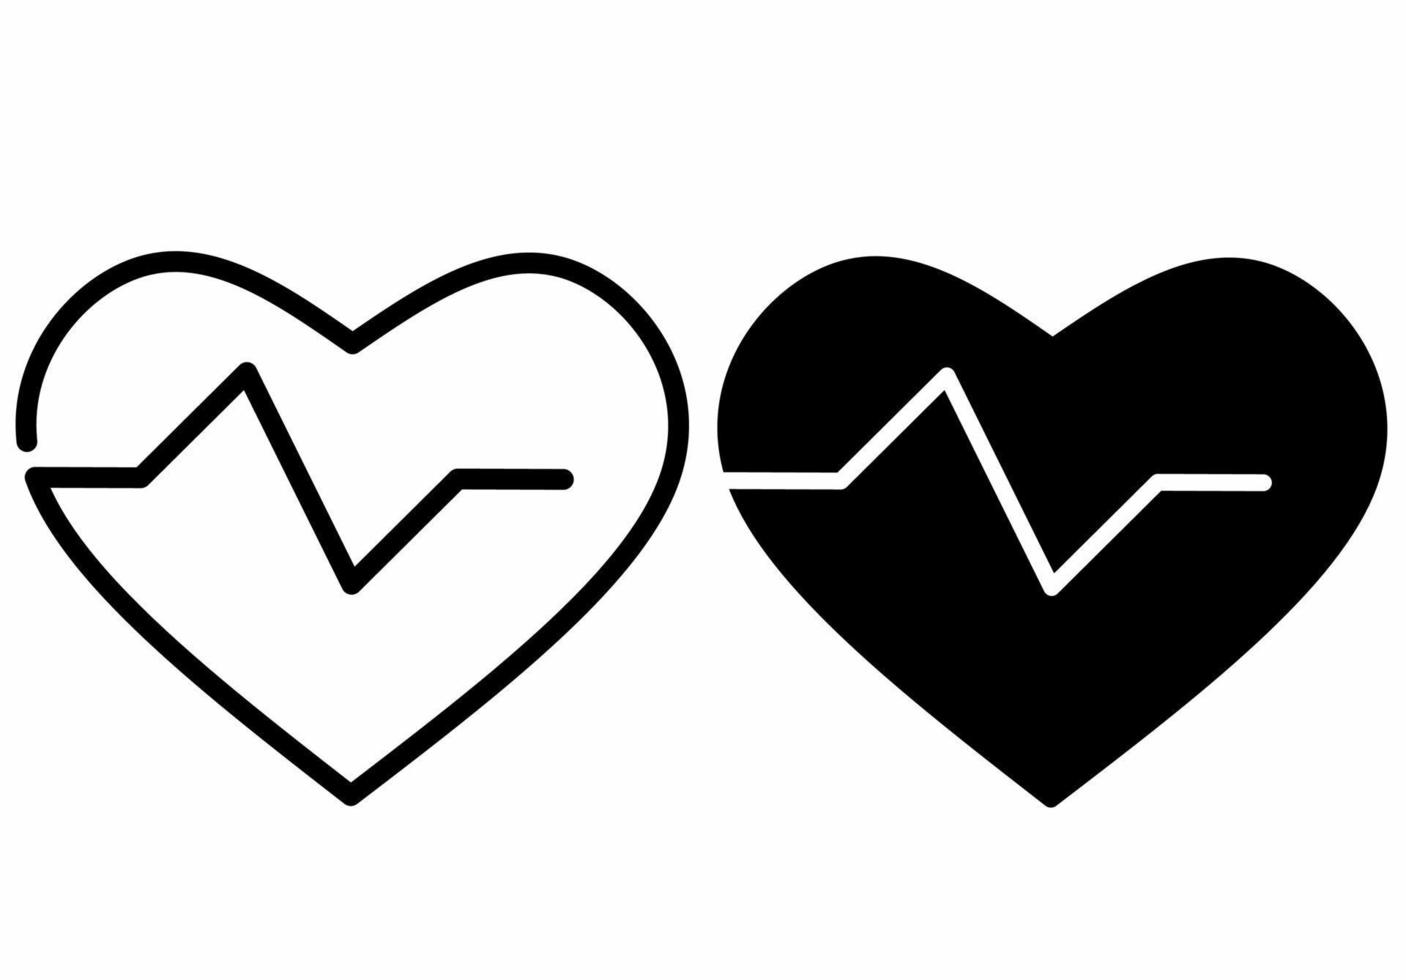 outline silhouette heart beat icon set isolated on white background vector